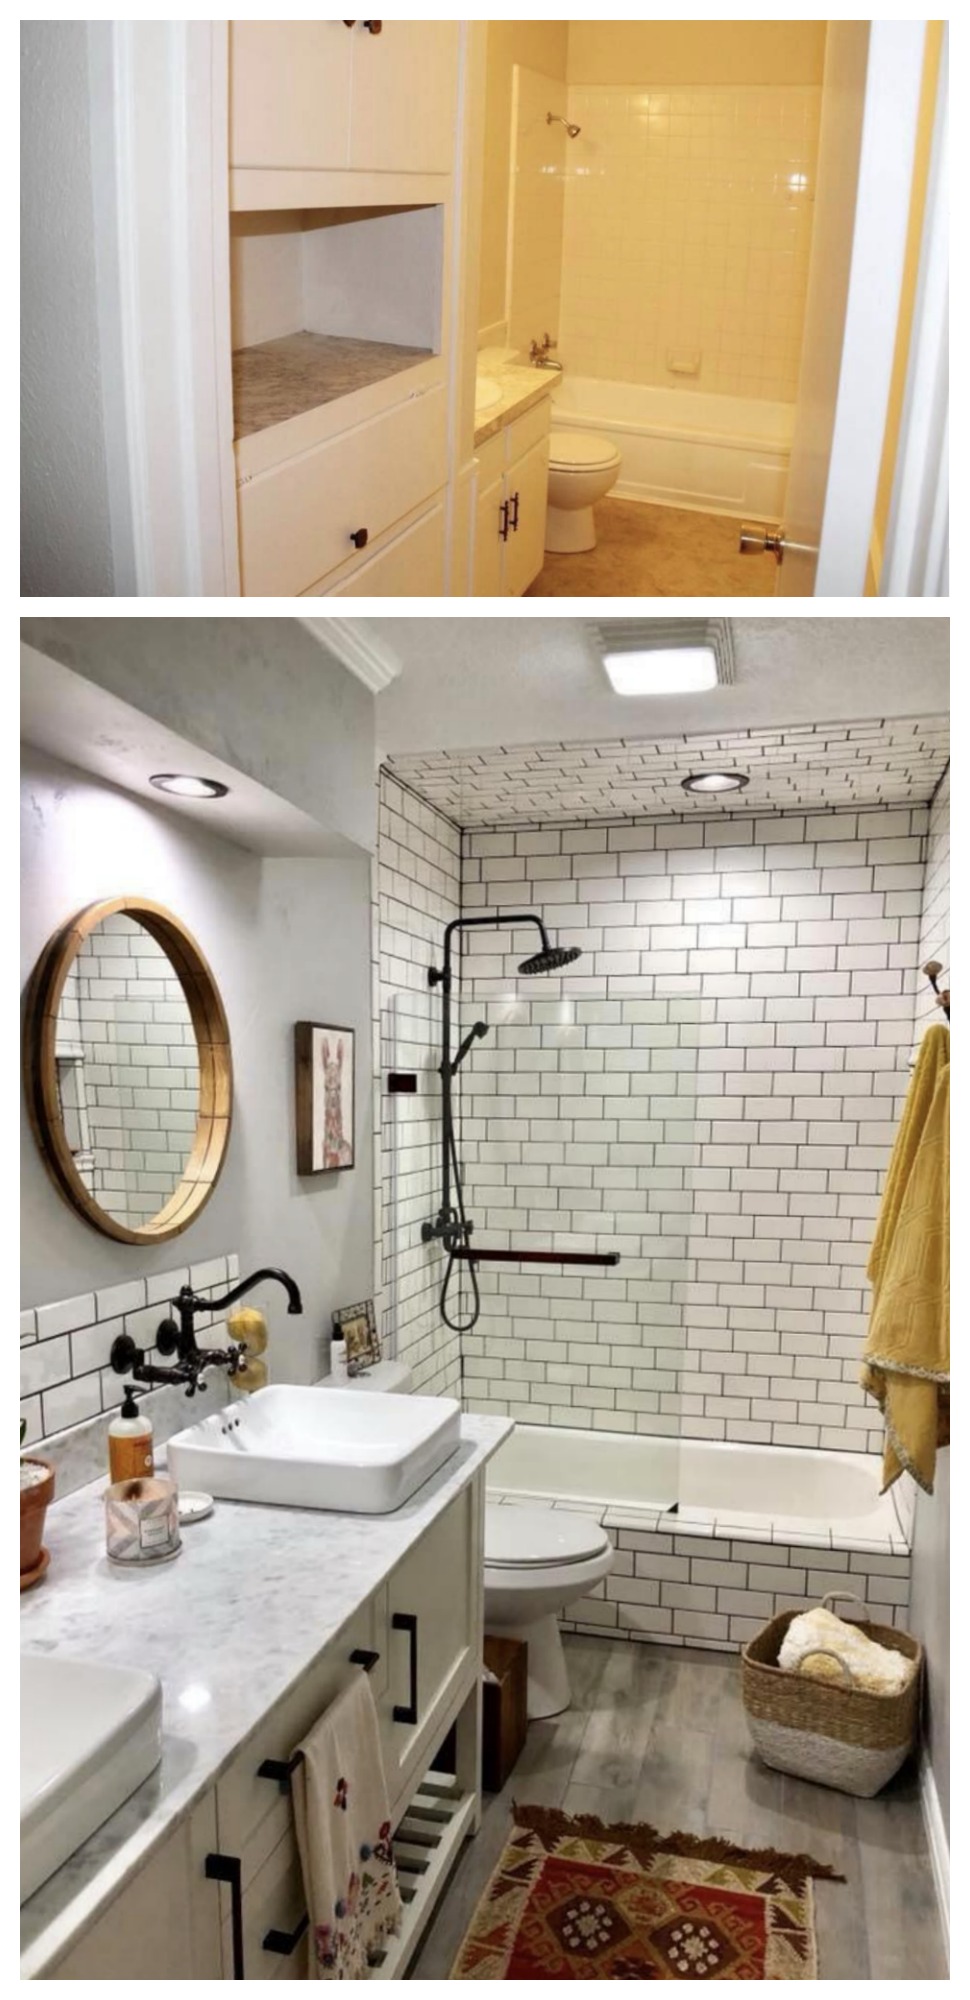 Bathroom BEFORE and AFTER!